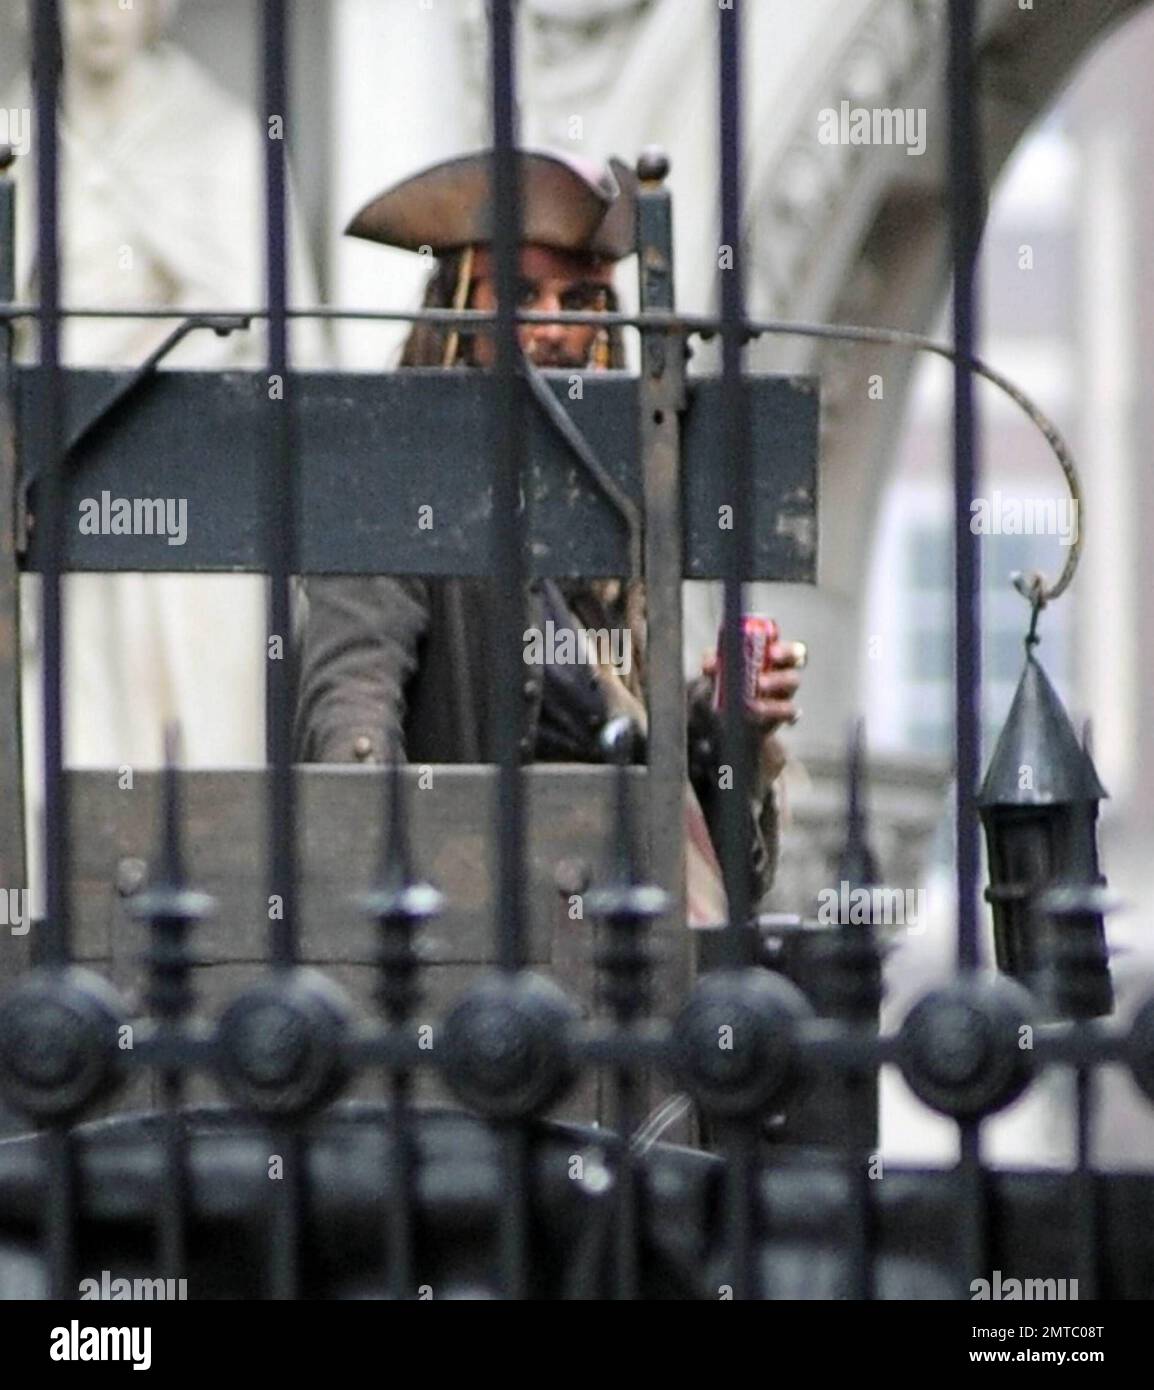 A stunt double dressed as Johnny Depp's character Captain Jack Sparrow sips on a soda and later is filmed driving a burning carriage on the set of 'Pirates of the Caribbean: On Stranger Tides' filming at Greenwich's Old Royal Naval College while excited fans tried to catch a glimpse of the action by climbing a fence. London, UK. 10/09/10. Stock Photo